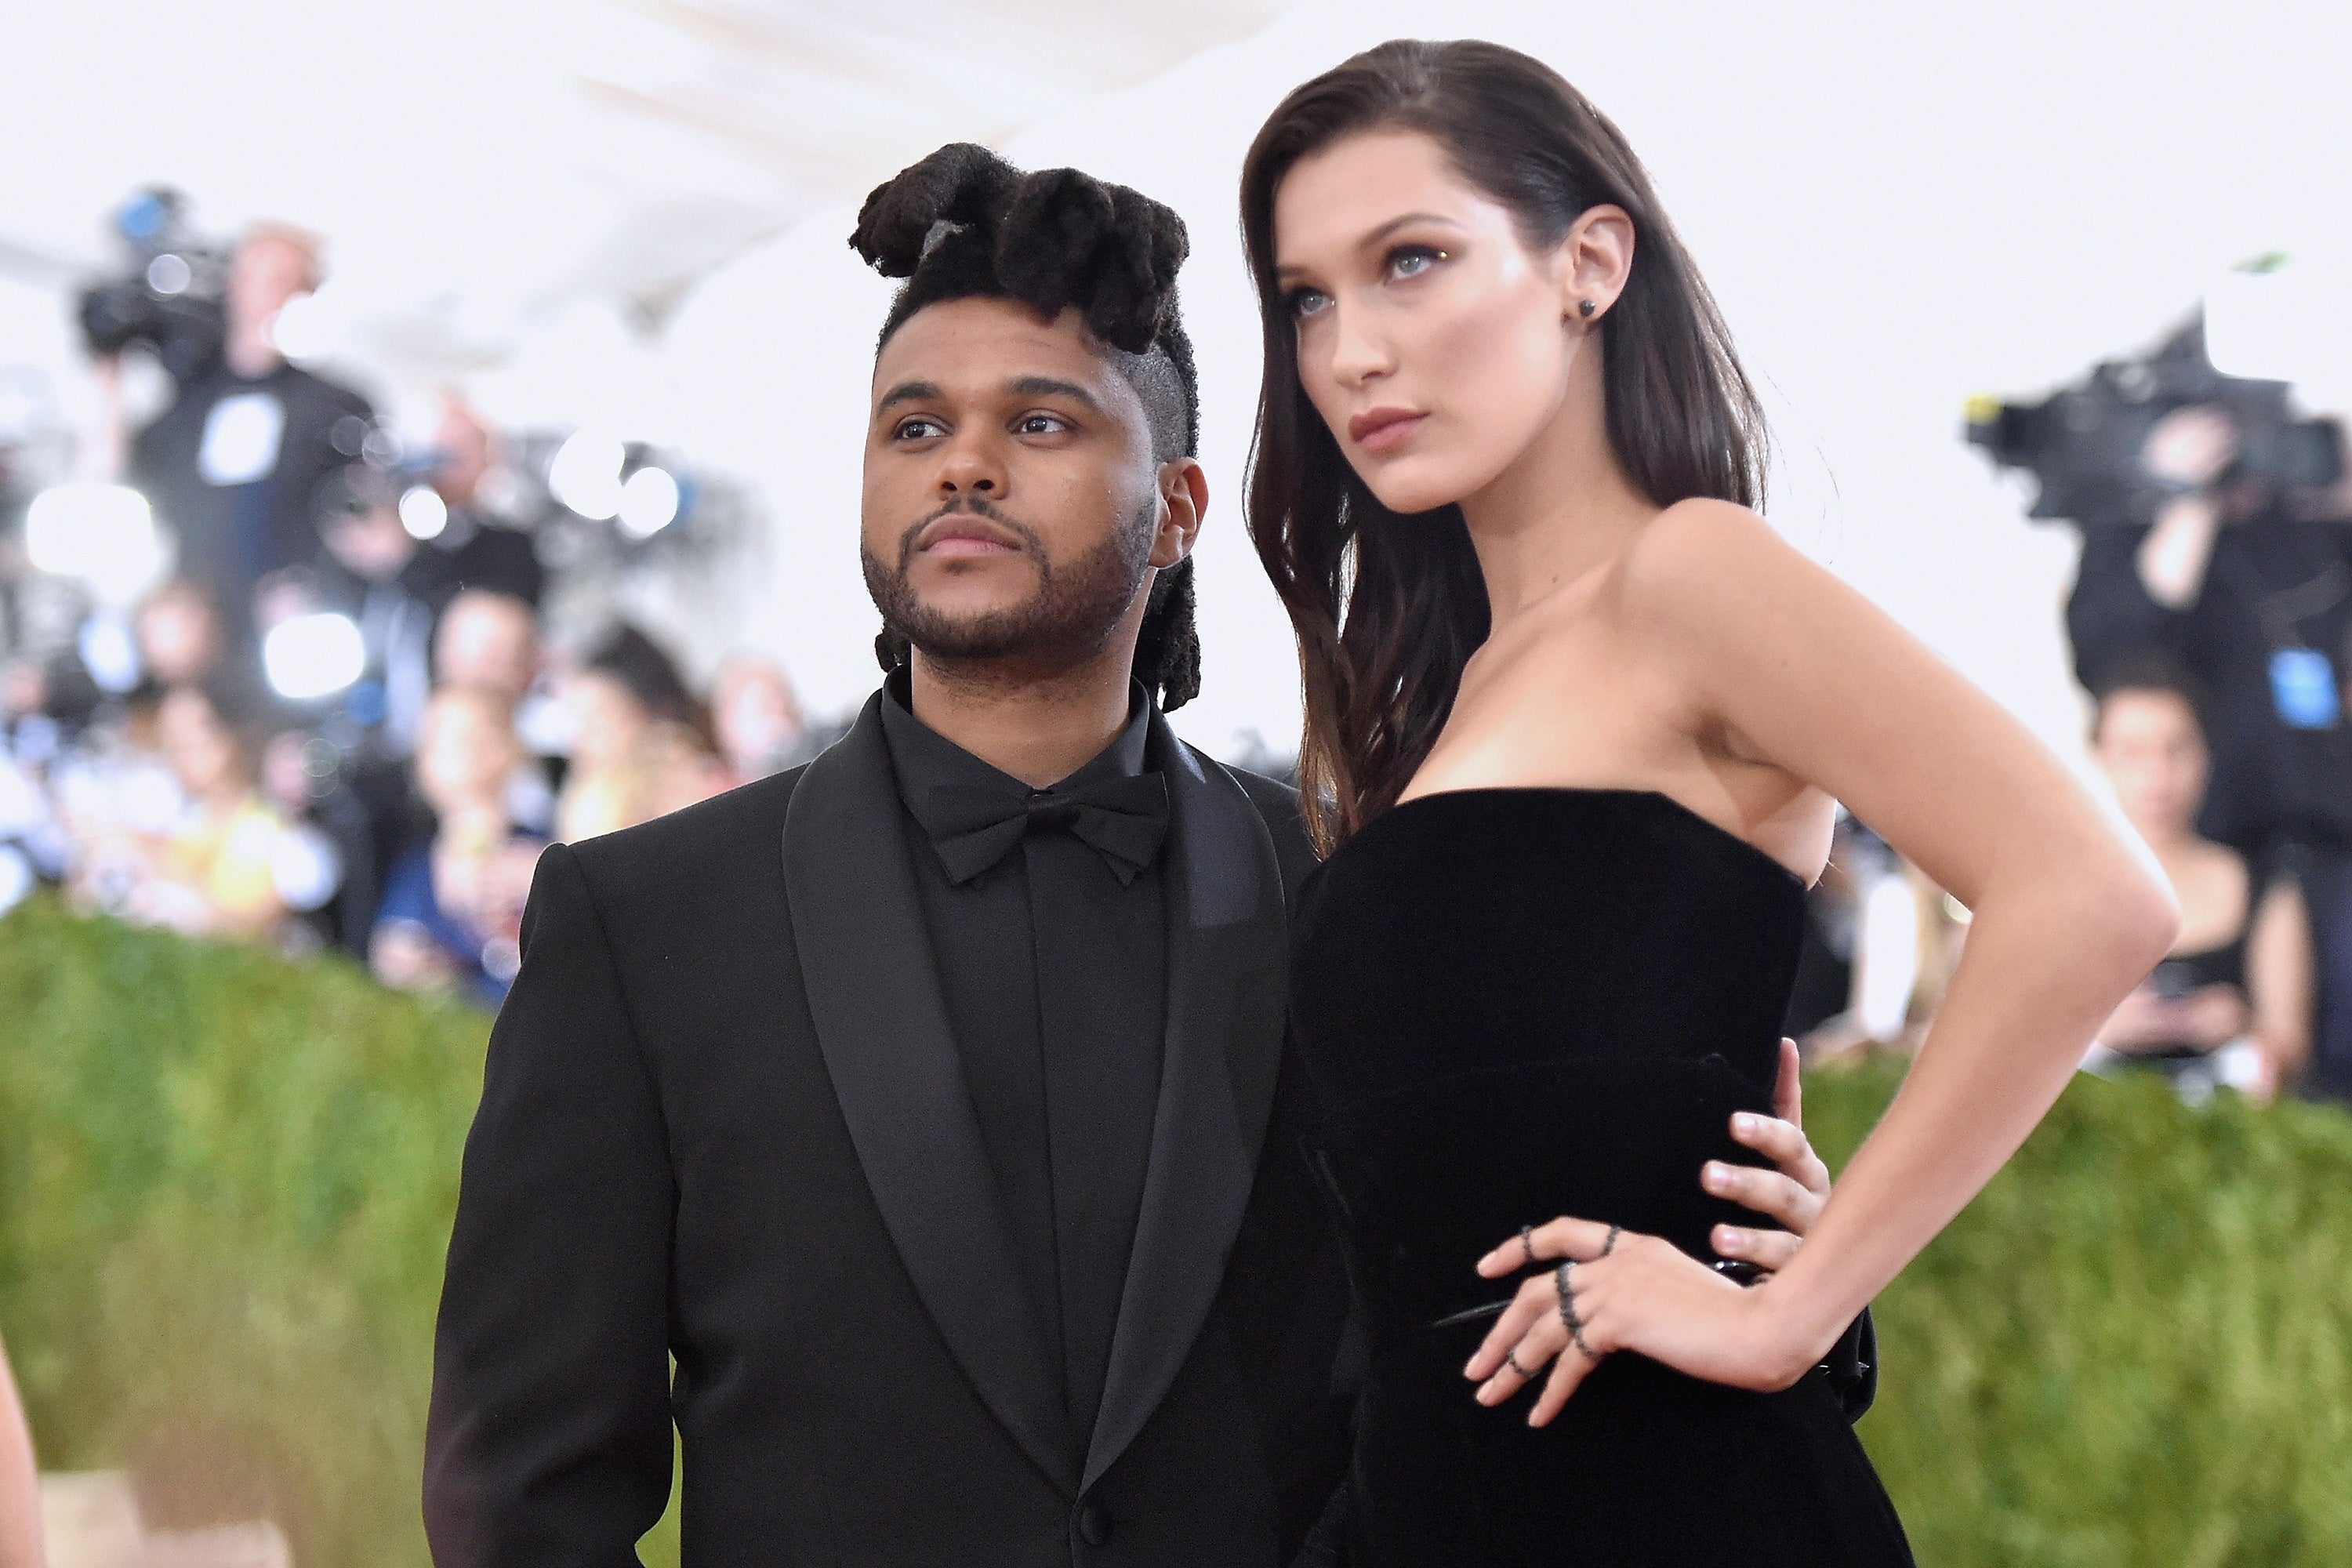 The Weeknd & Bella Hadid Walk Out Holding Hands in New York City!: Photo  4158221, Bella Hadid, The Weeknd Photos